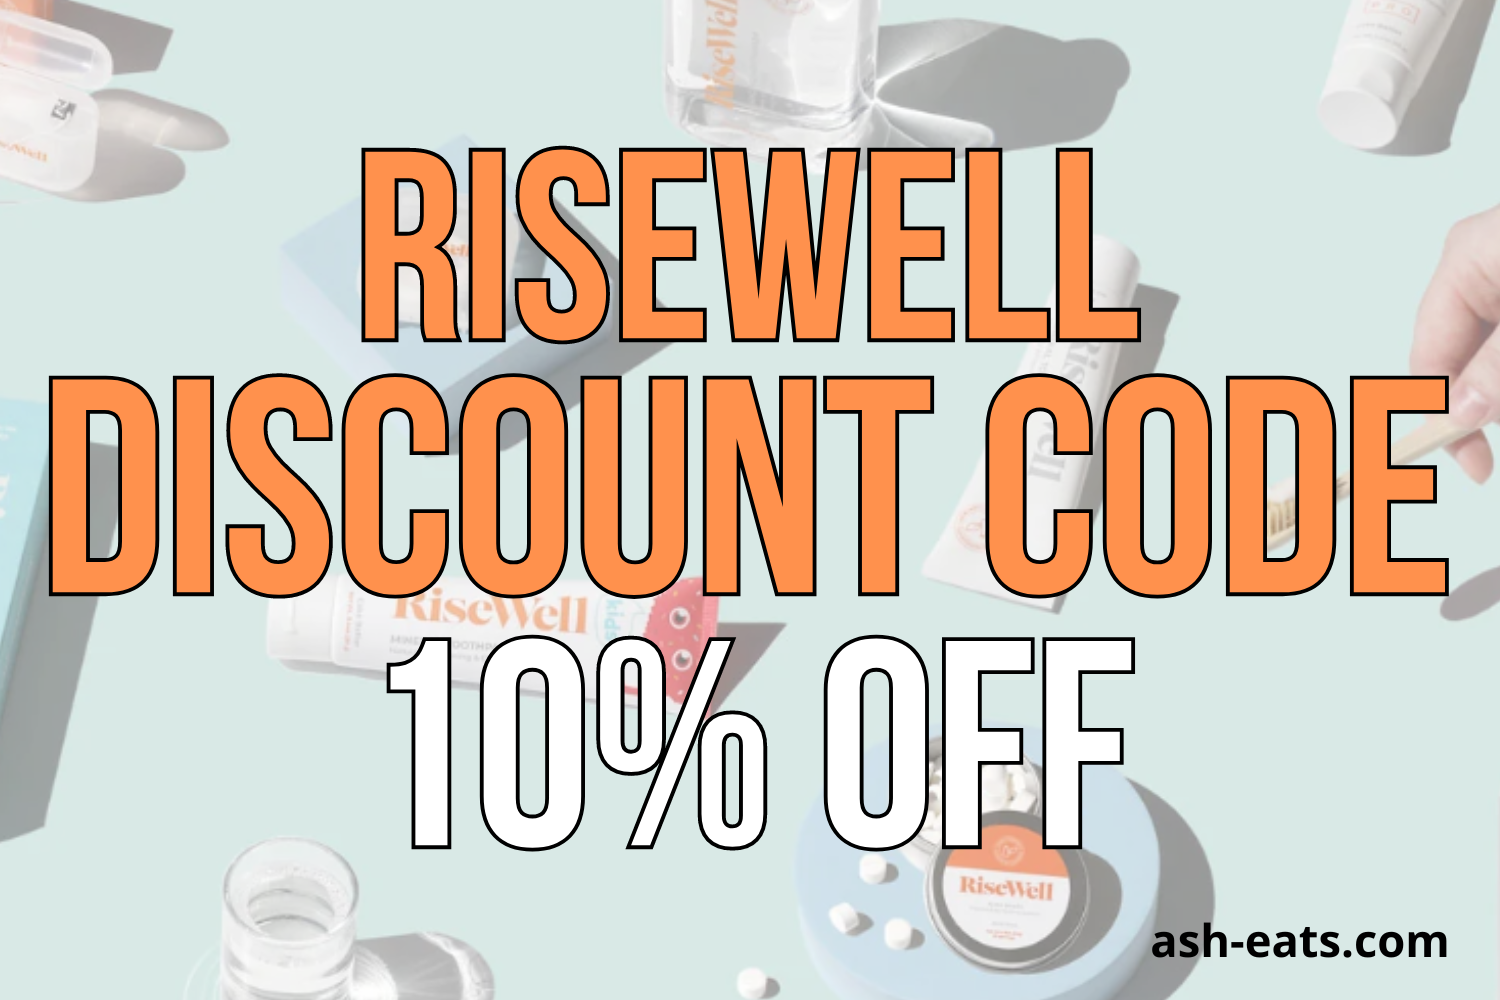 risewell discount code